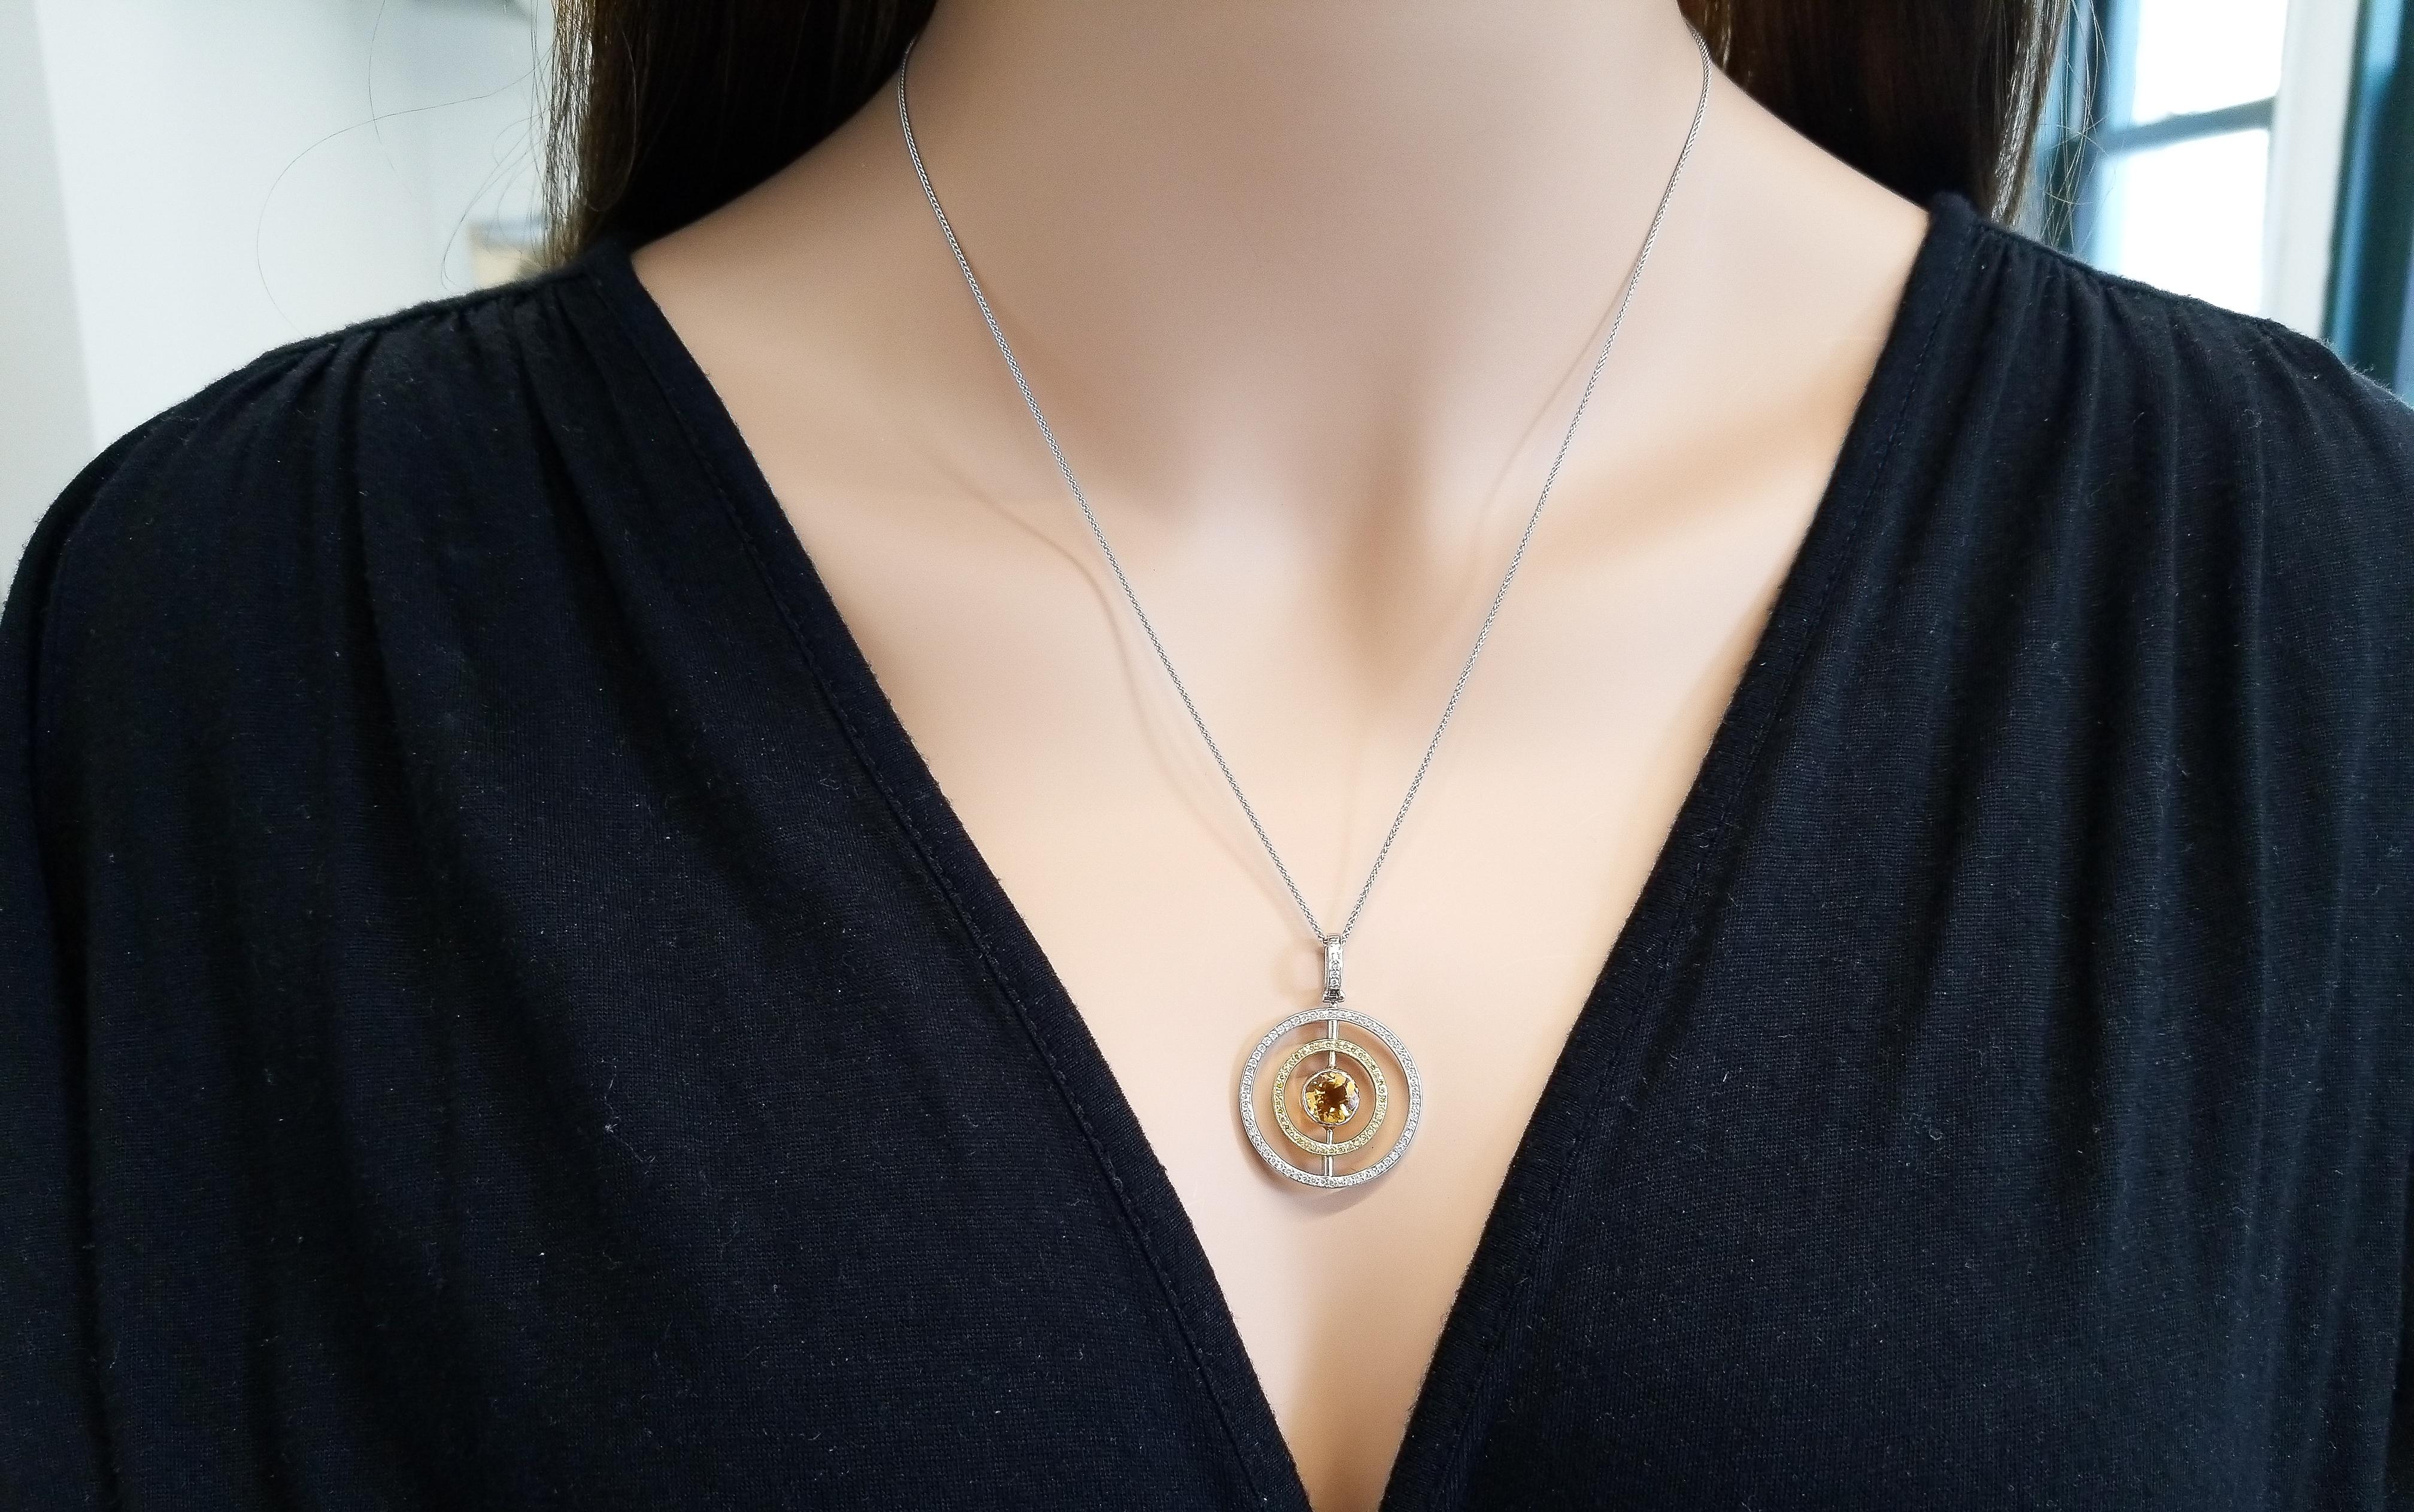 Designed in 18 karat two-tone gold, this spectacular eternity concentric circle pendant features a round brilliant cut intense sunny yellow citrine bezel set in the center, creating a modern style. A total of 0.27 carat round brilliant white